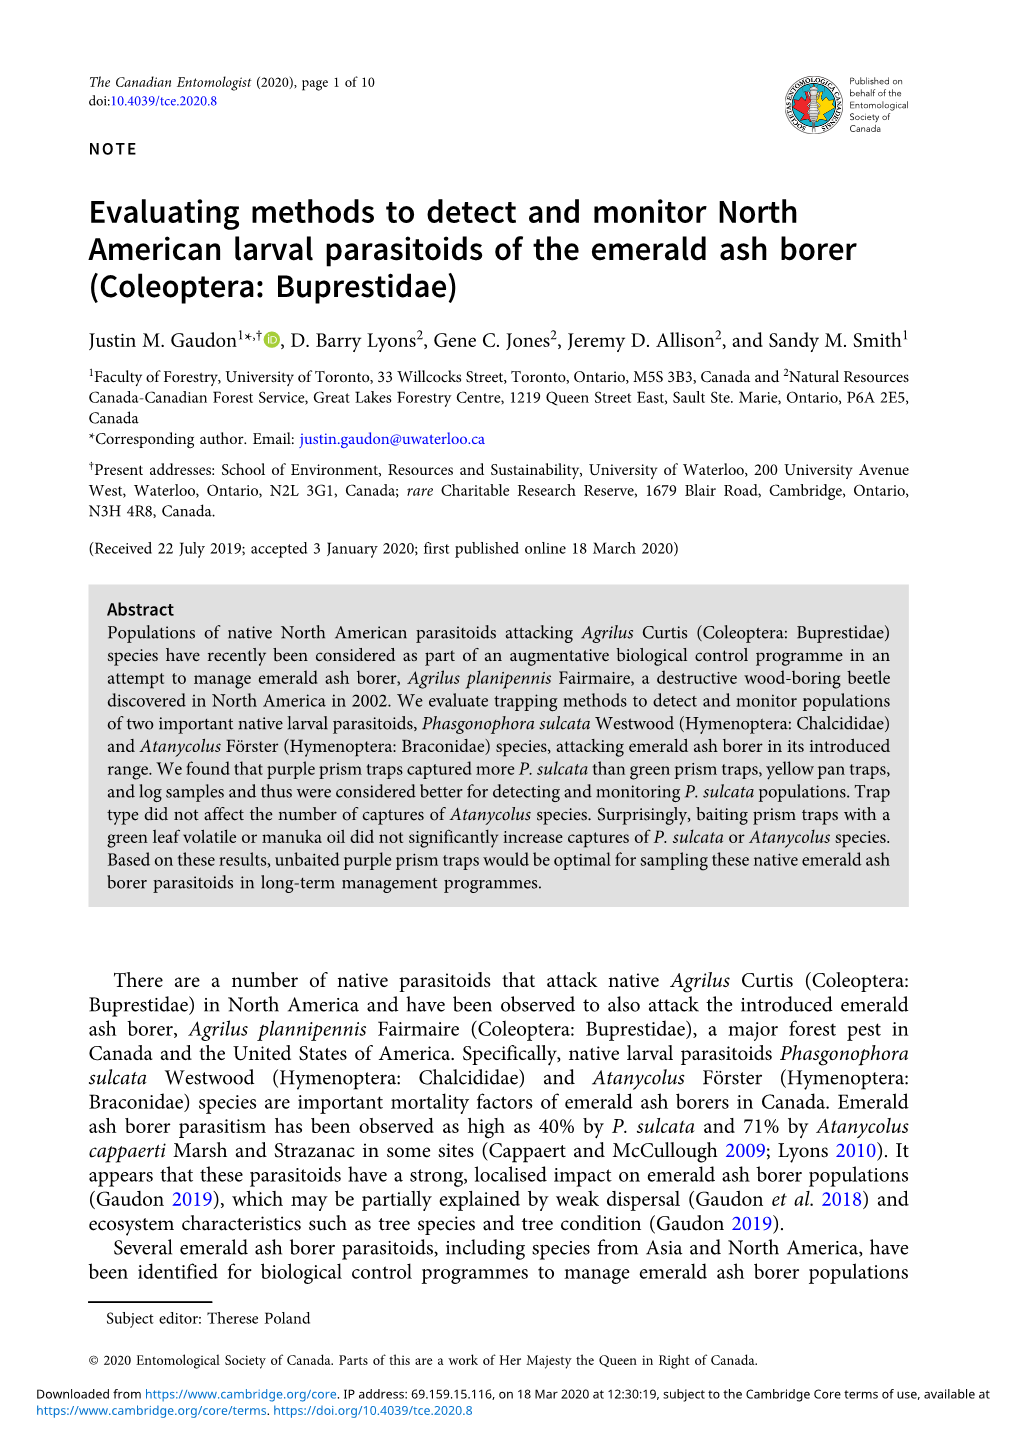 Evaluating Methods to Detect and Monitor North American Larval Parasitoids of the Emerald Ash Borer (Coleoptera: Buprestidae)